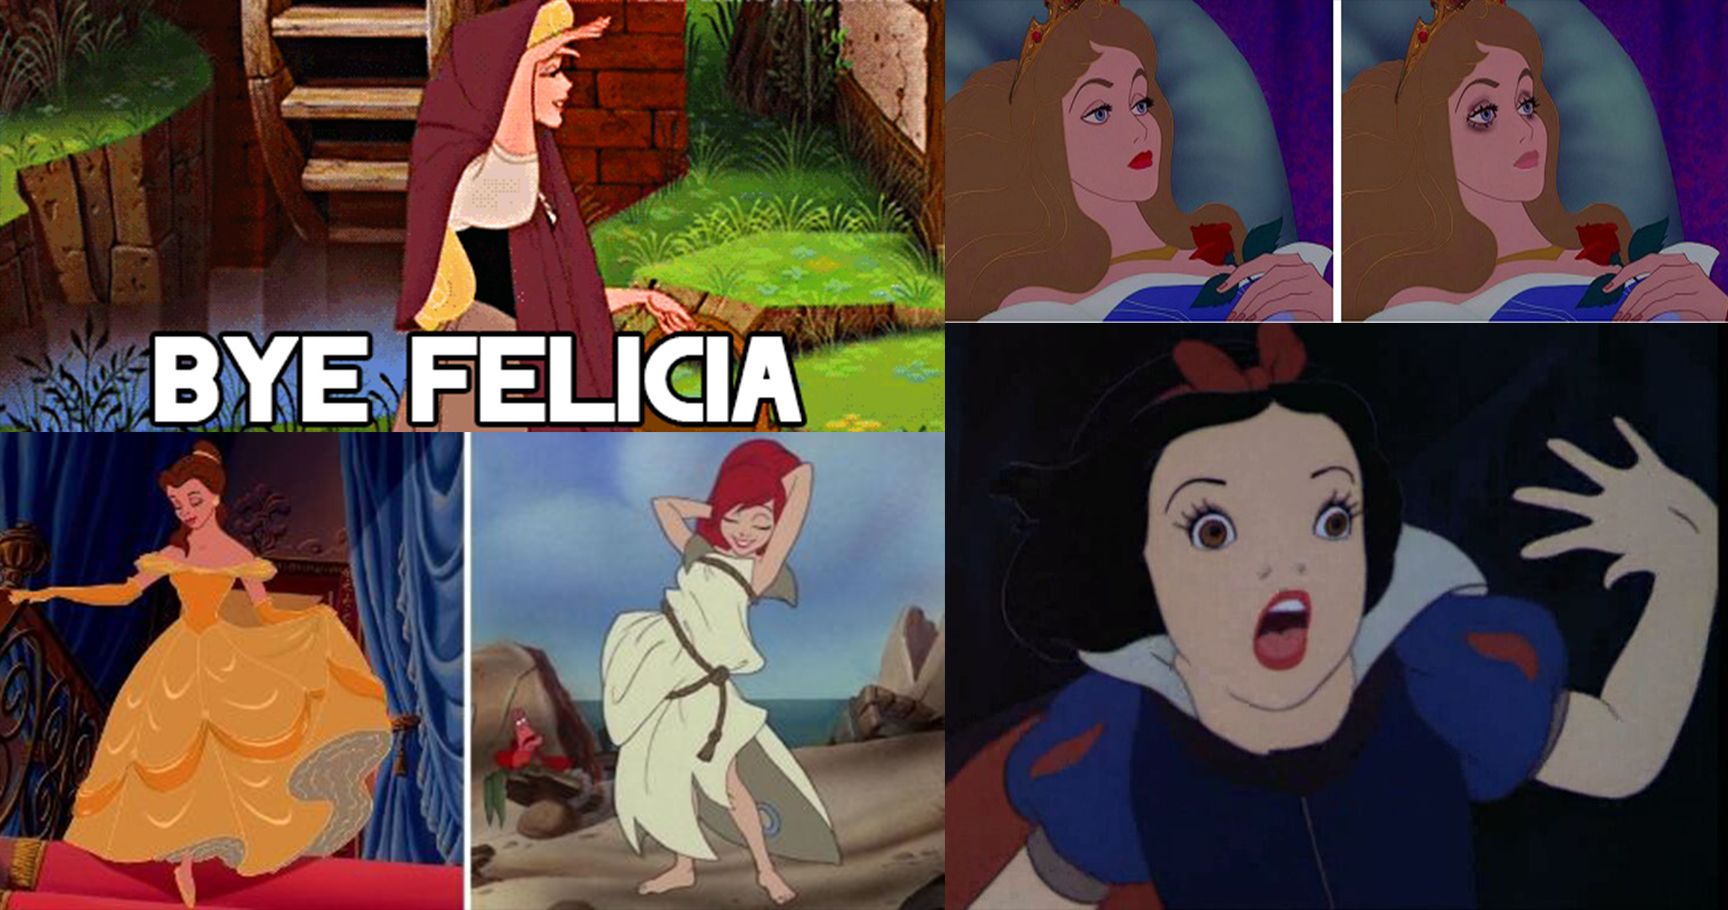 15 Reasons Disney Princesses Are Actually Terrible Role Models